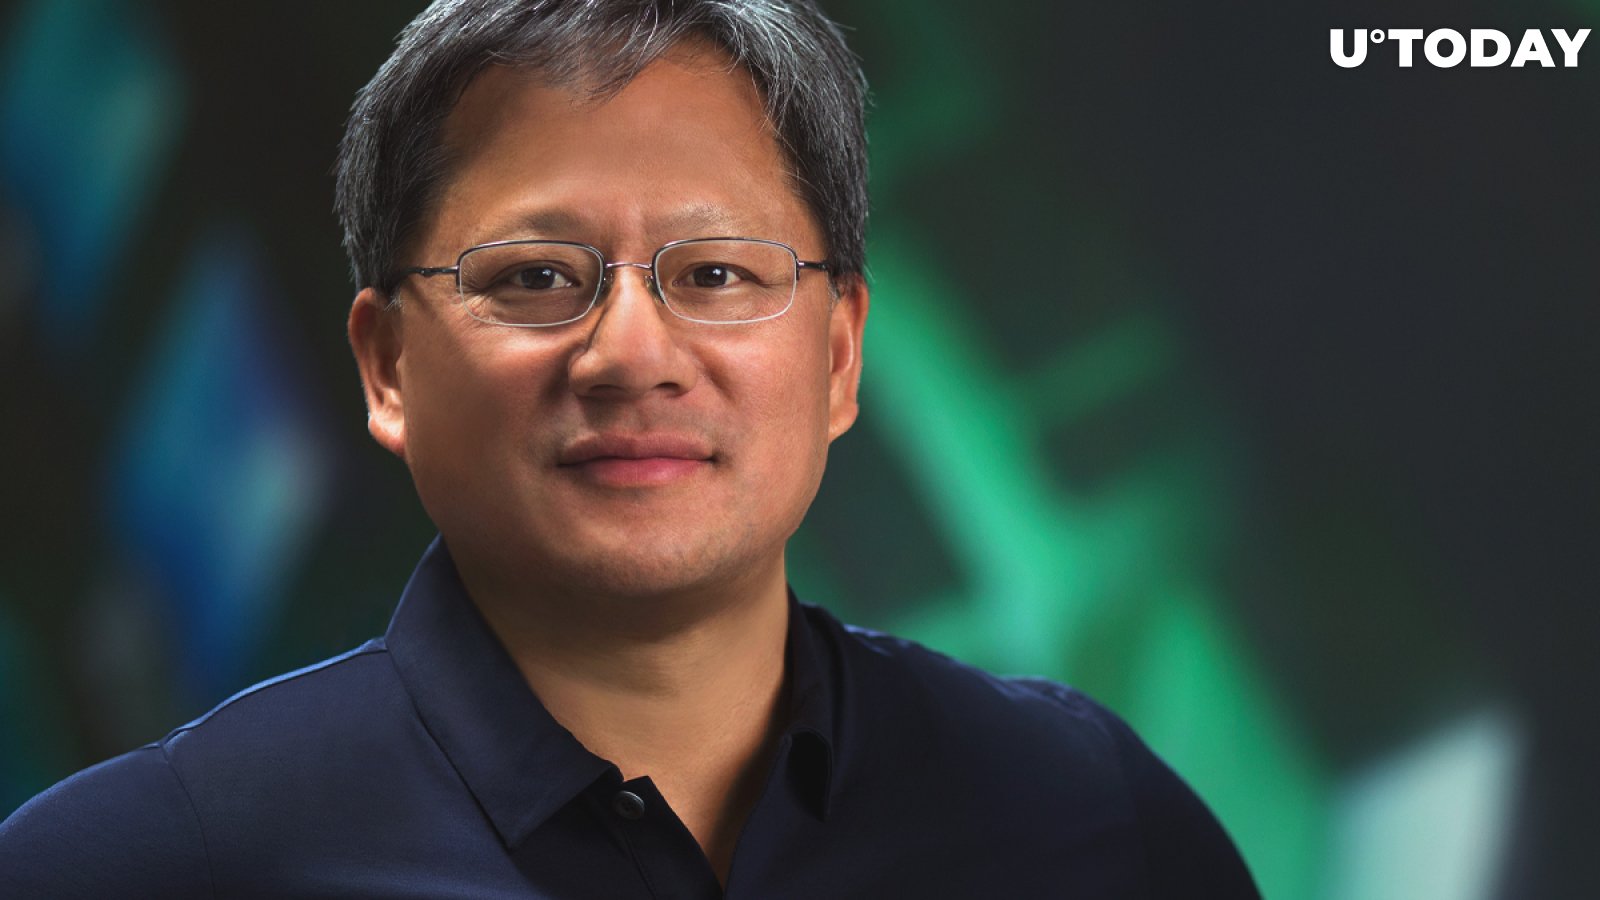 Nvidia CEO Jensen Huang Reveals How They Created ‘Big Bang’ of Artificial Intelligence